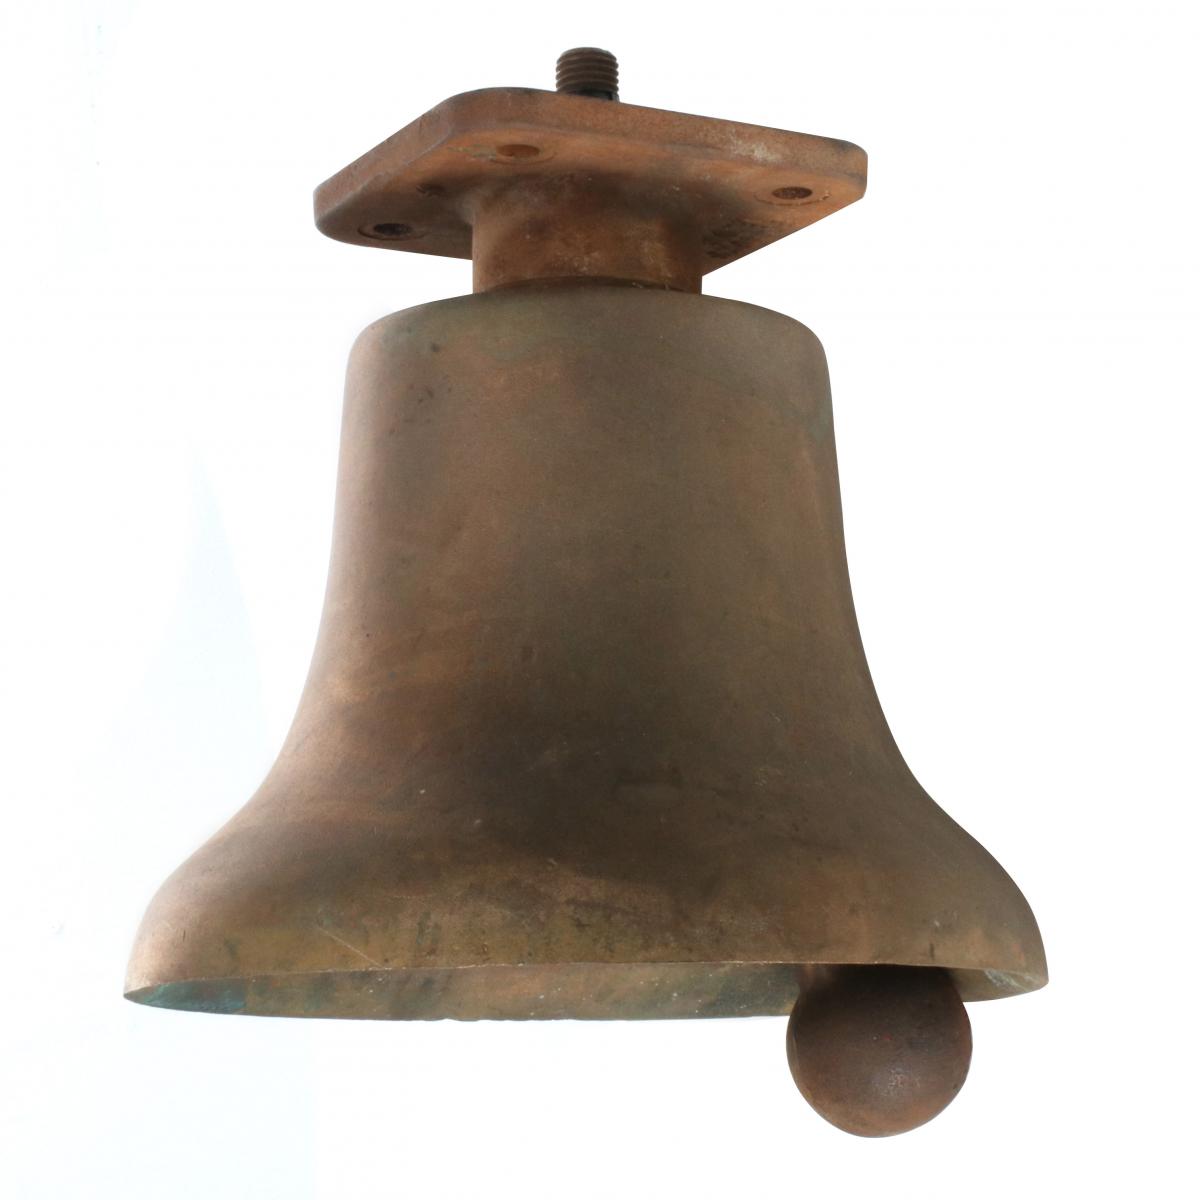 A BRONZE AIR-OPERATED LOCOMOTIVE BELL